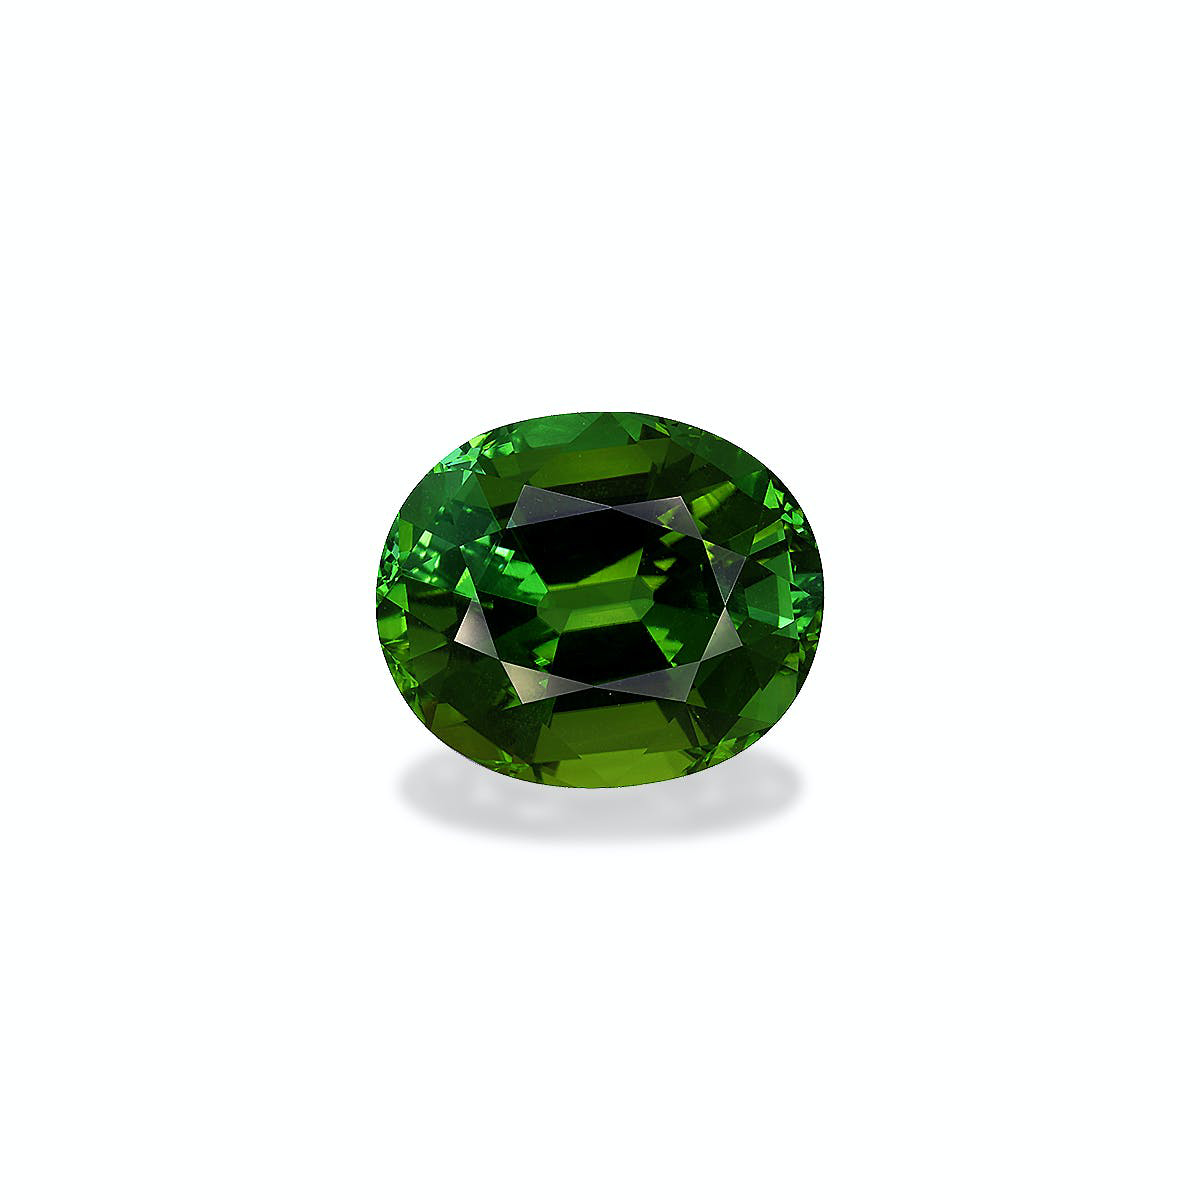 Picture of Forest Green Tourmaline 8.72ct (TG1592)